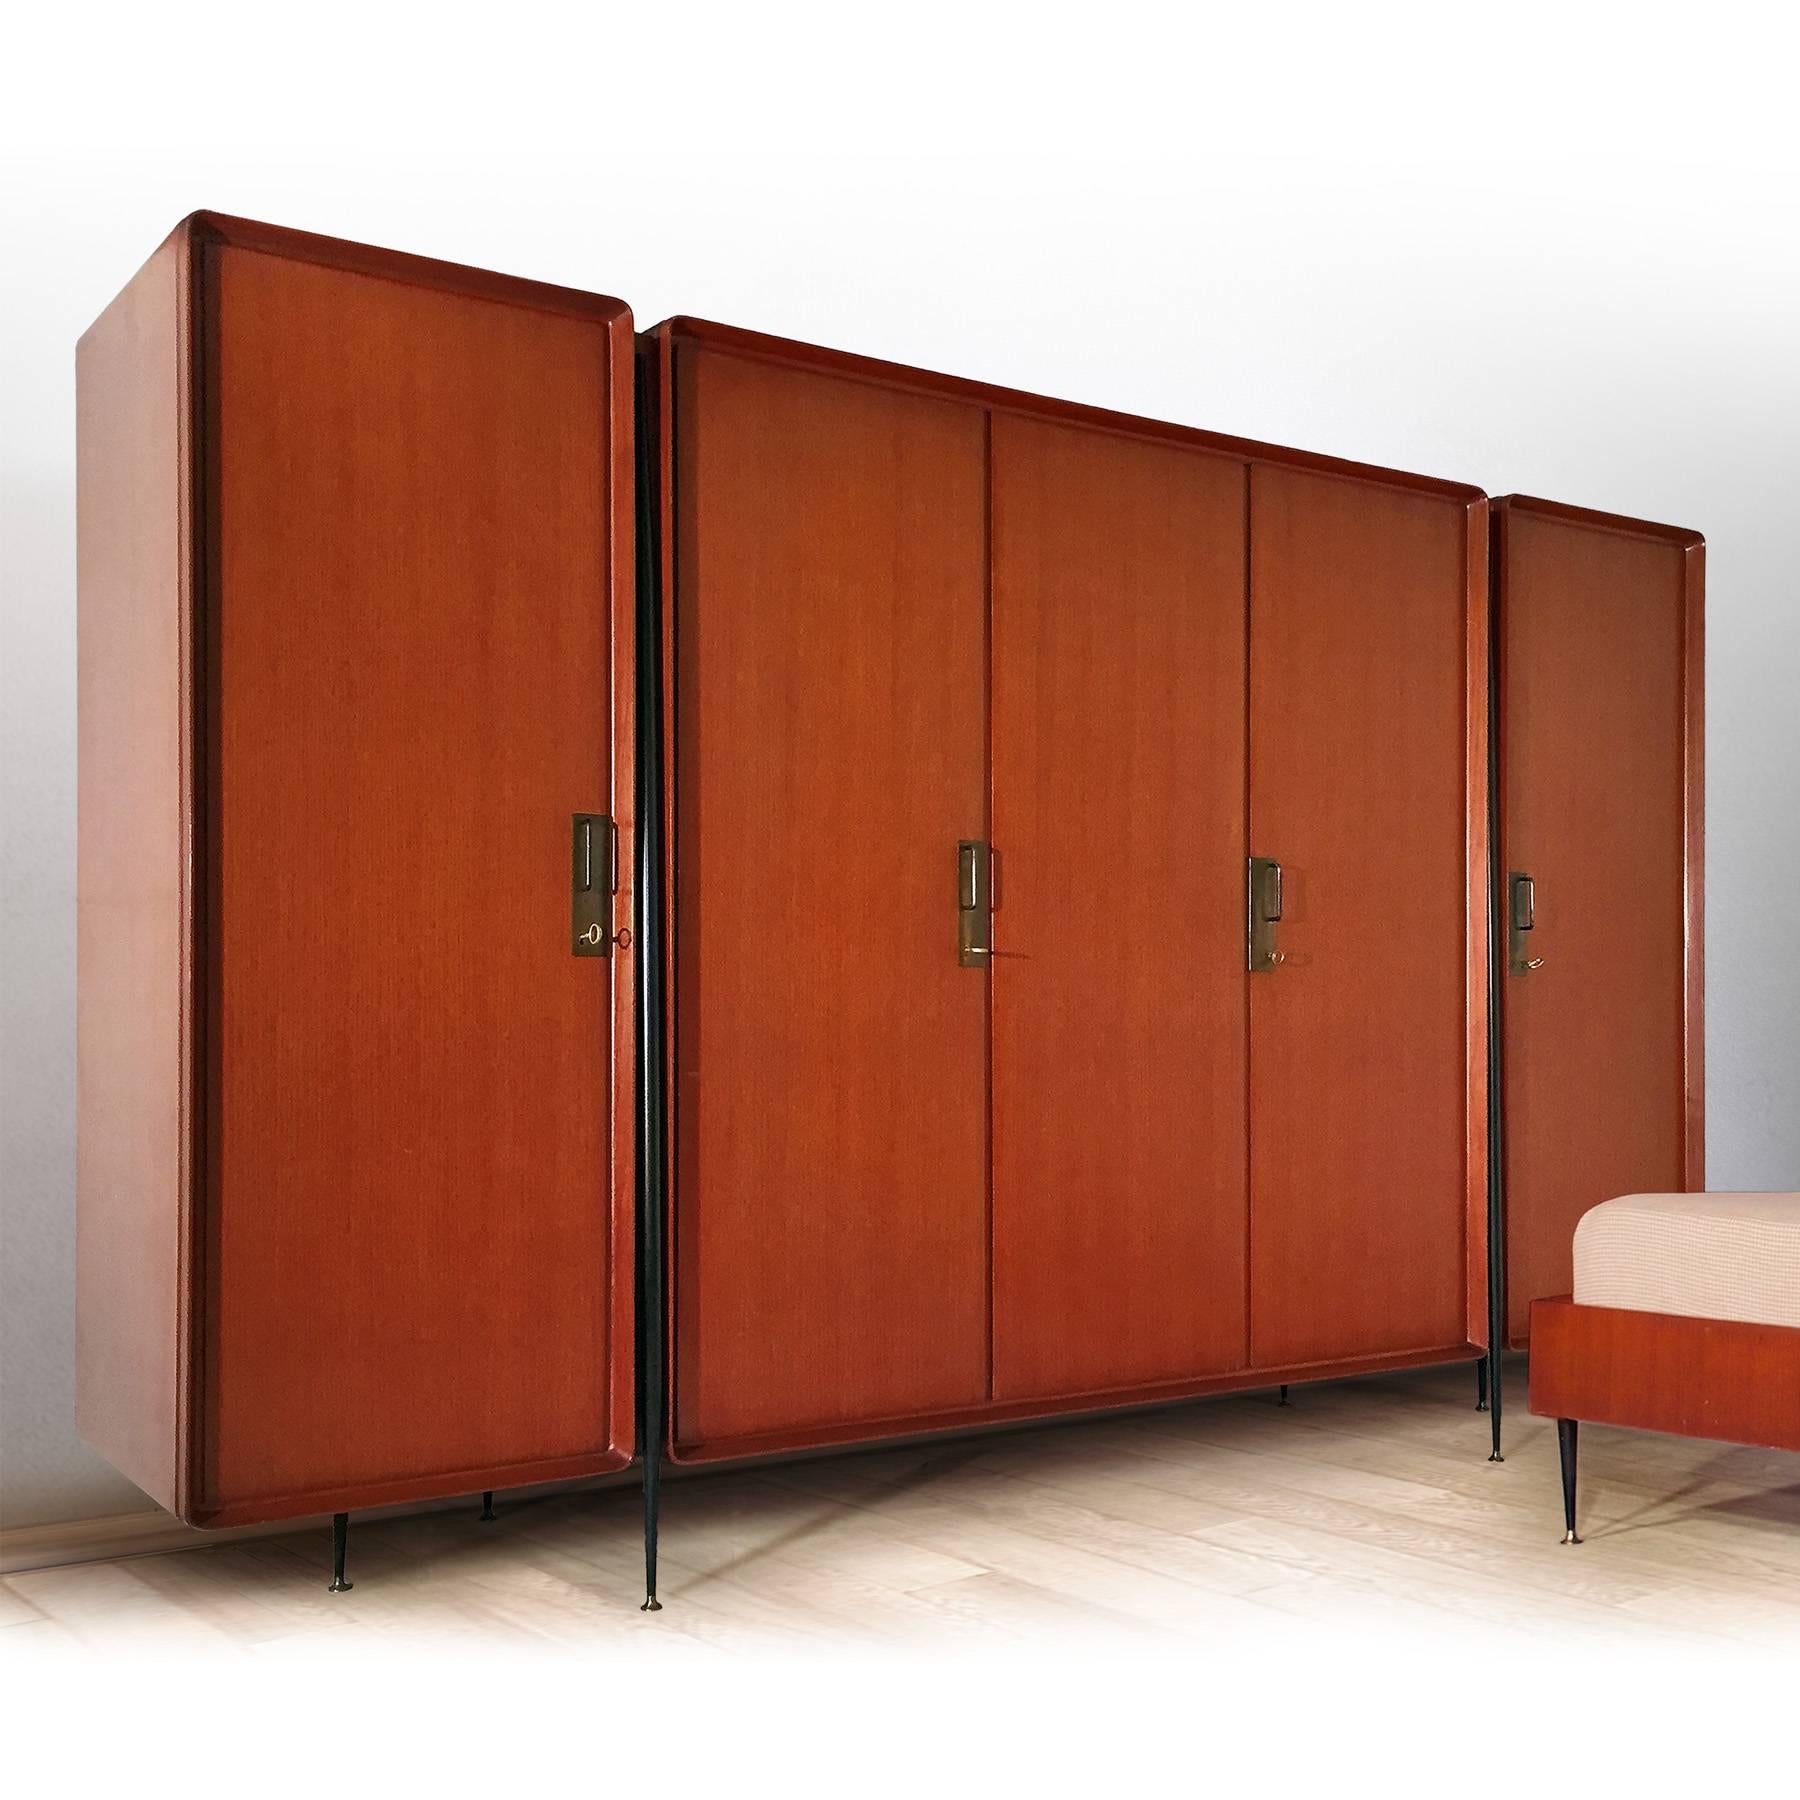 Stylish Italian wardrobe designed by Silvio Cavatorta in the 1950s.
The cabinet is made of semi gloss lacquered teak veneer with five doors finished with brass details, supported on tapered steel legs with brass feet.
Internally it offers a lot of